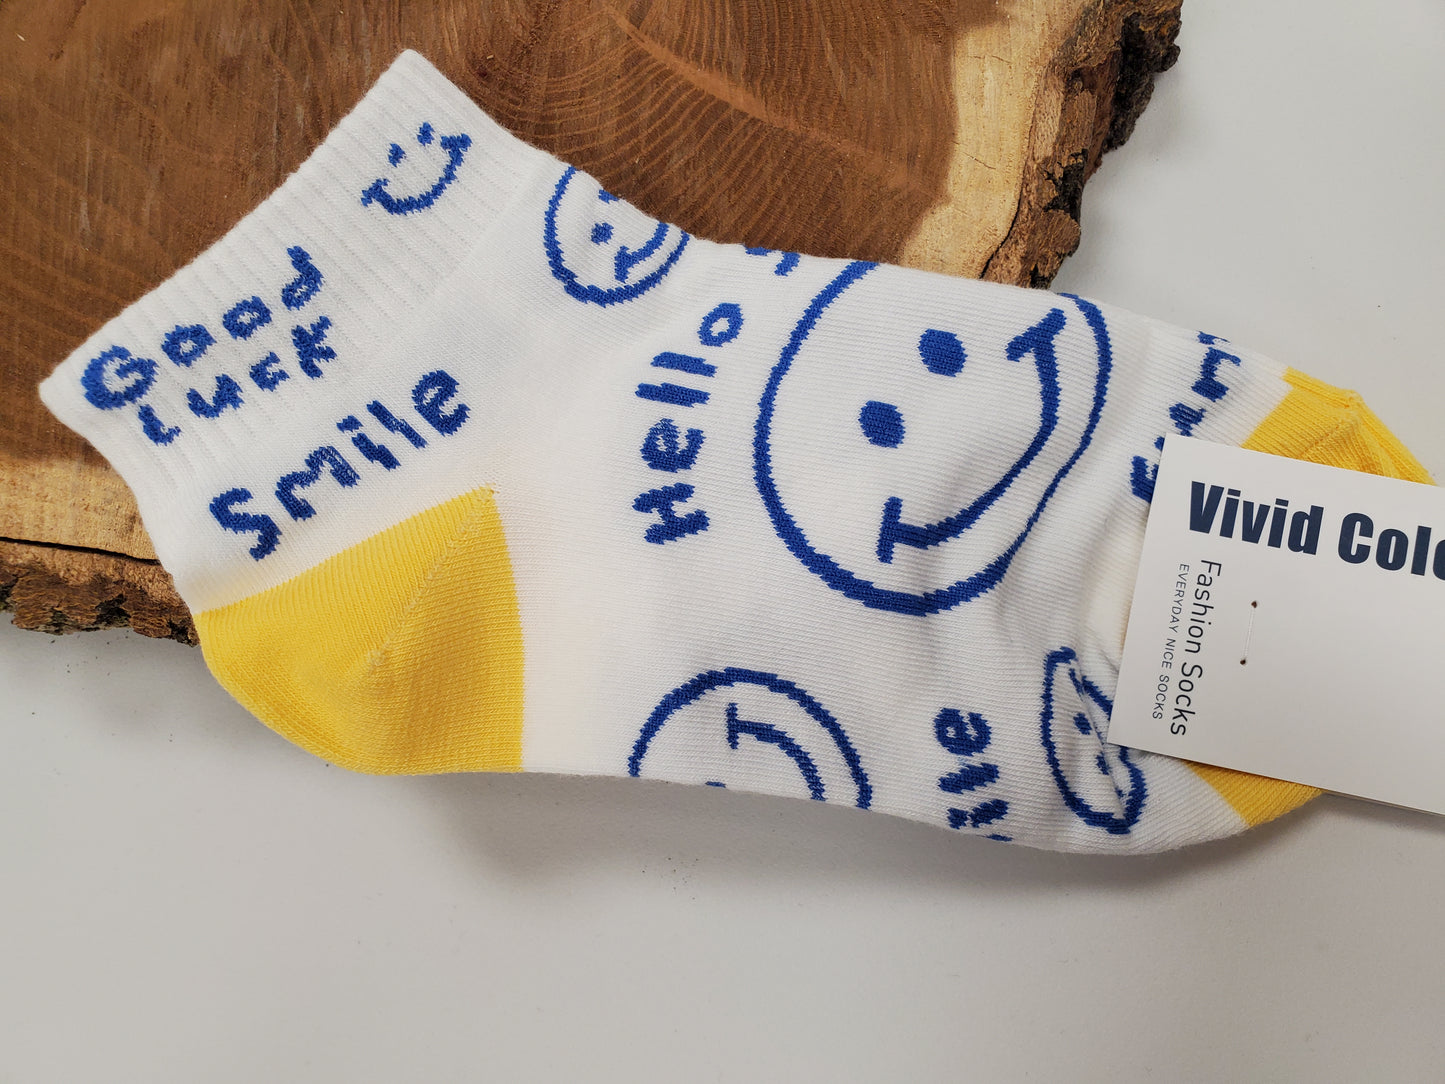 SMILEY FACE ANKLE SOCKS - BLUE/YELLOW